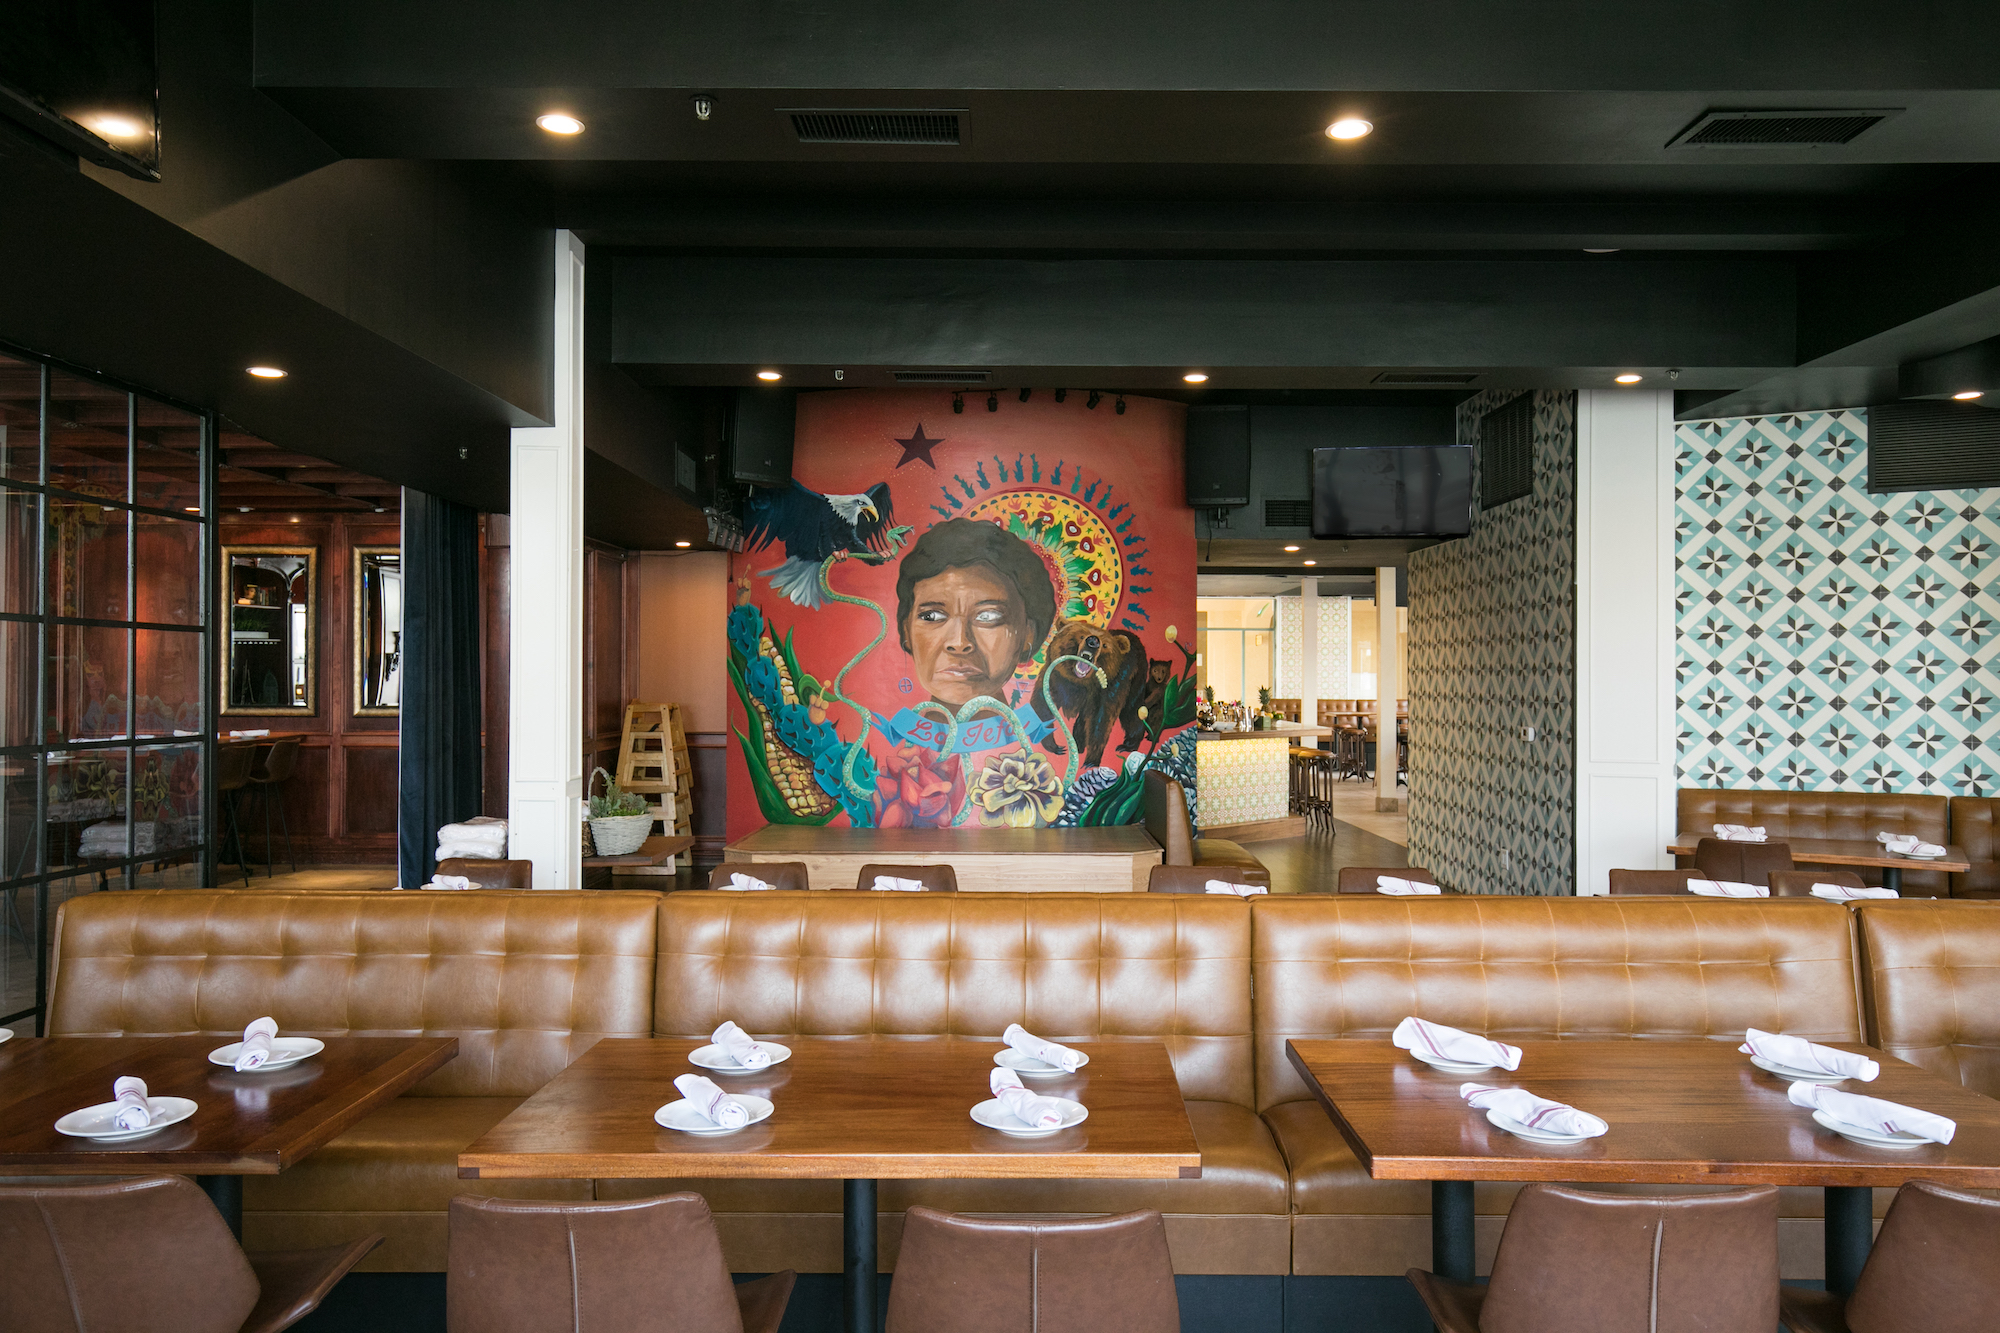 Dining area of restaurant with mural in the background